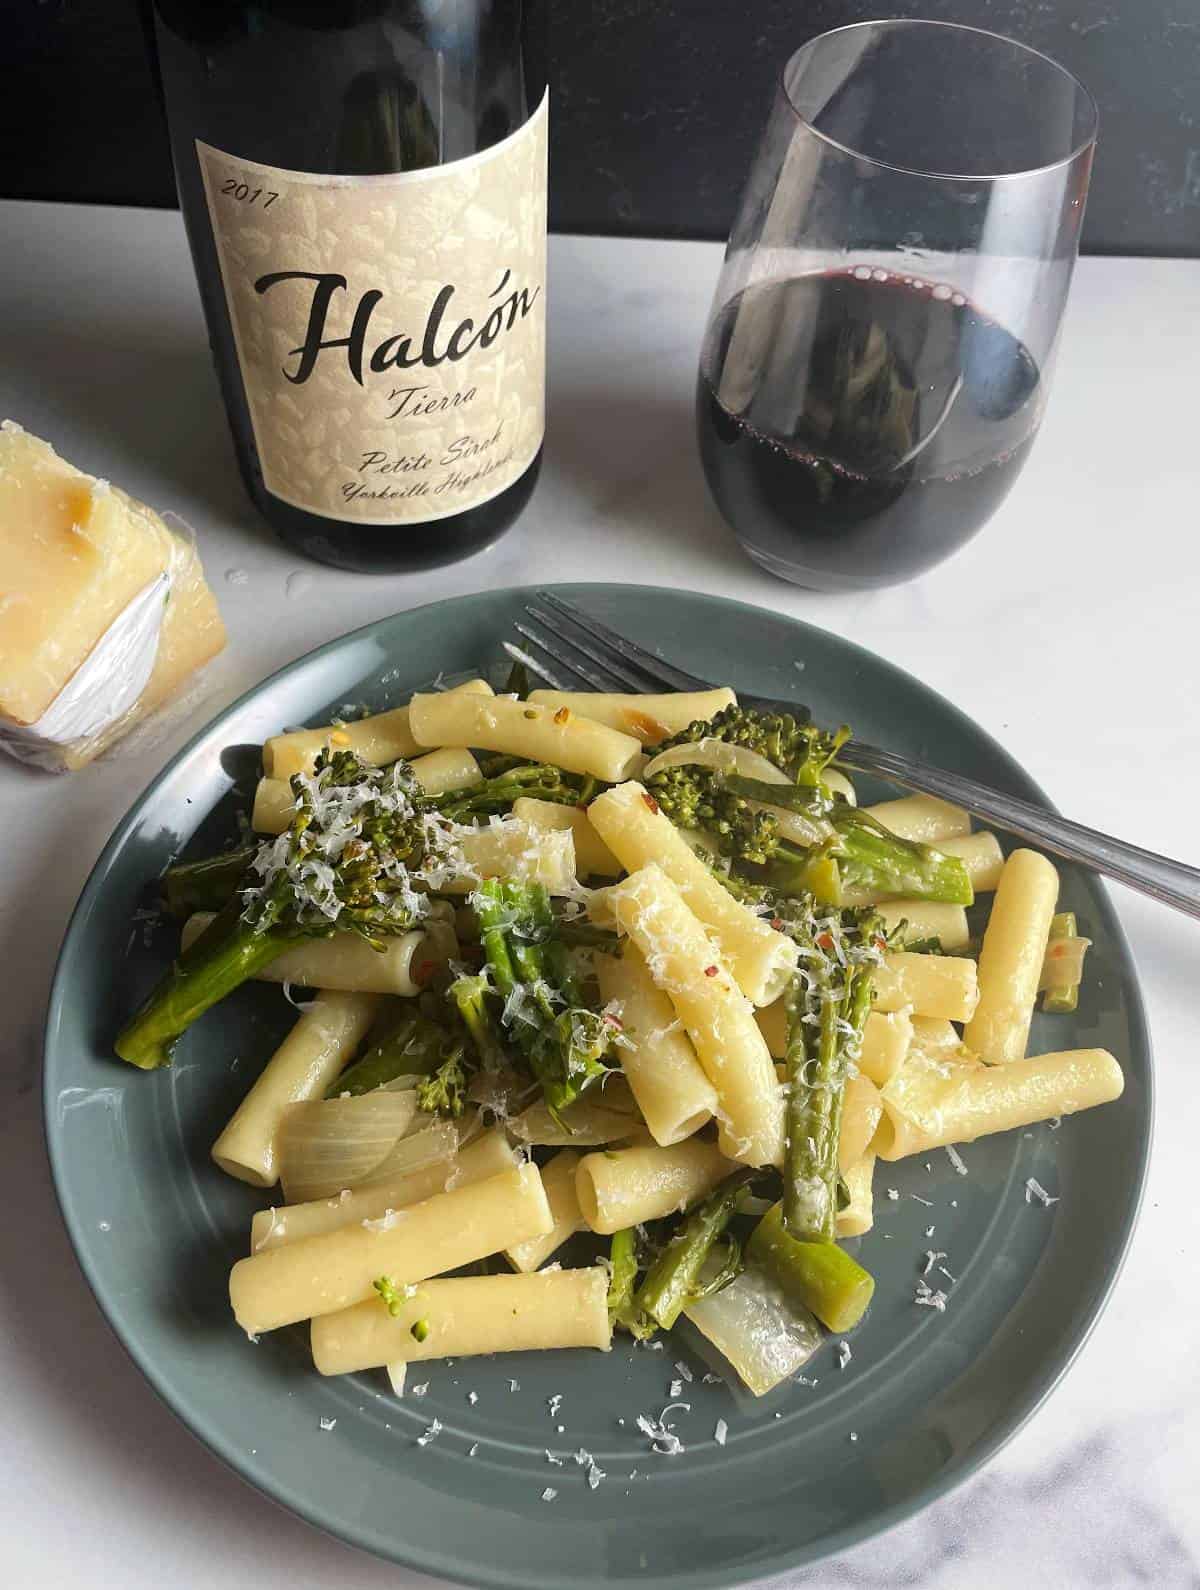 broccolini and ziti pasta served with a red Petite Sirah wine.